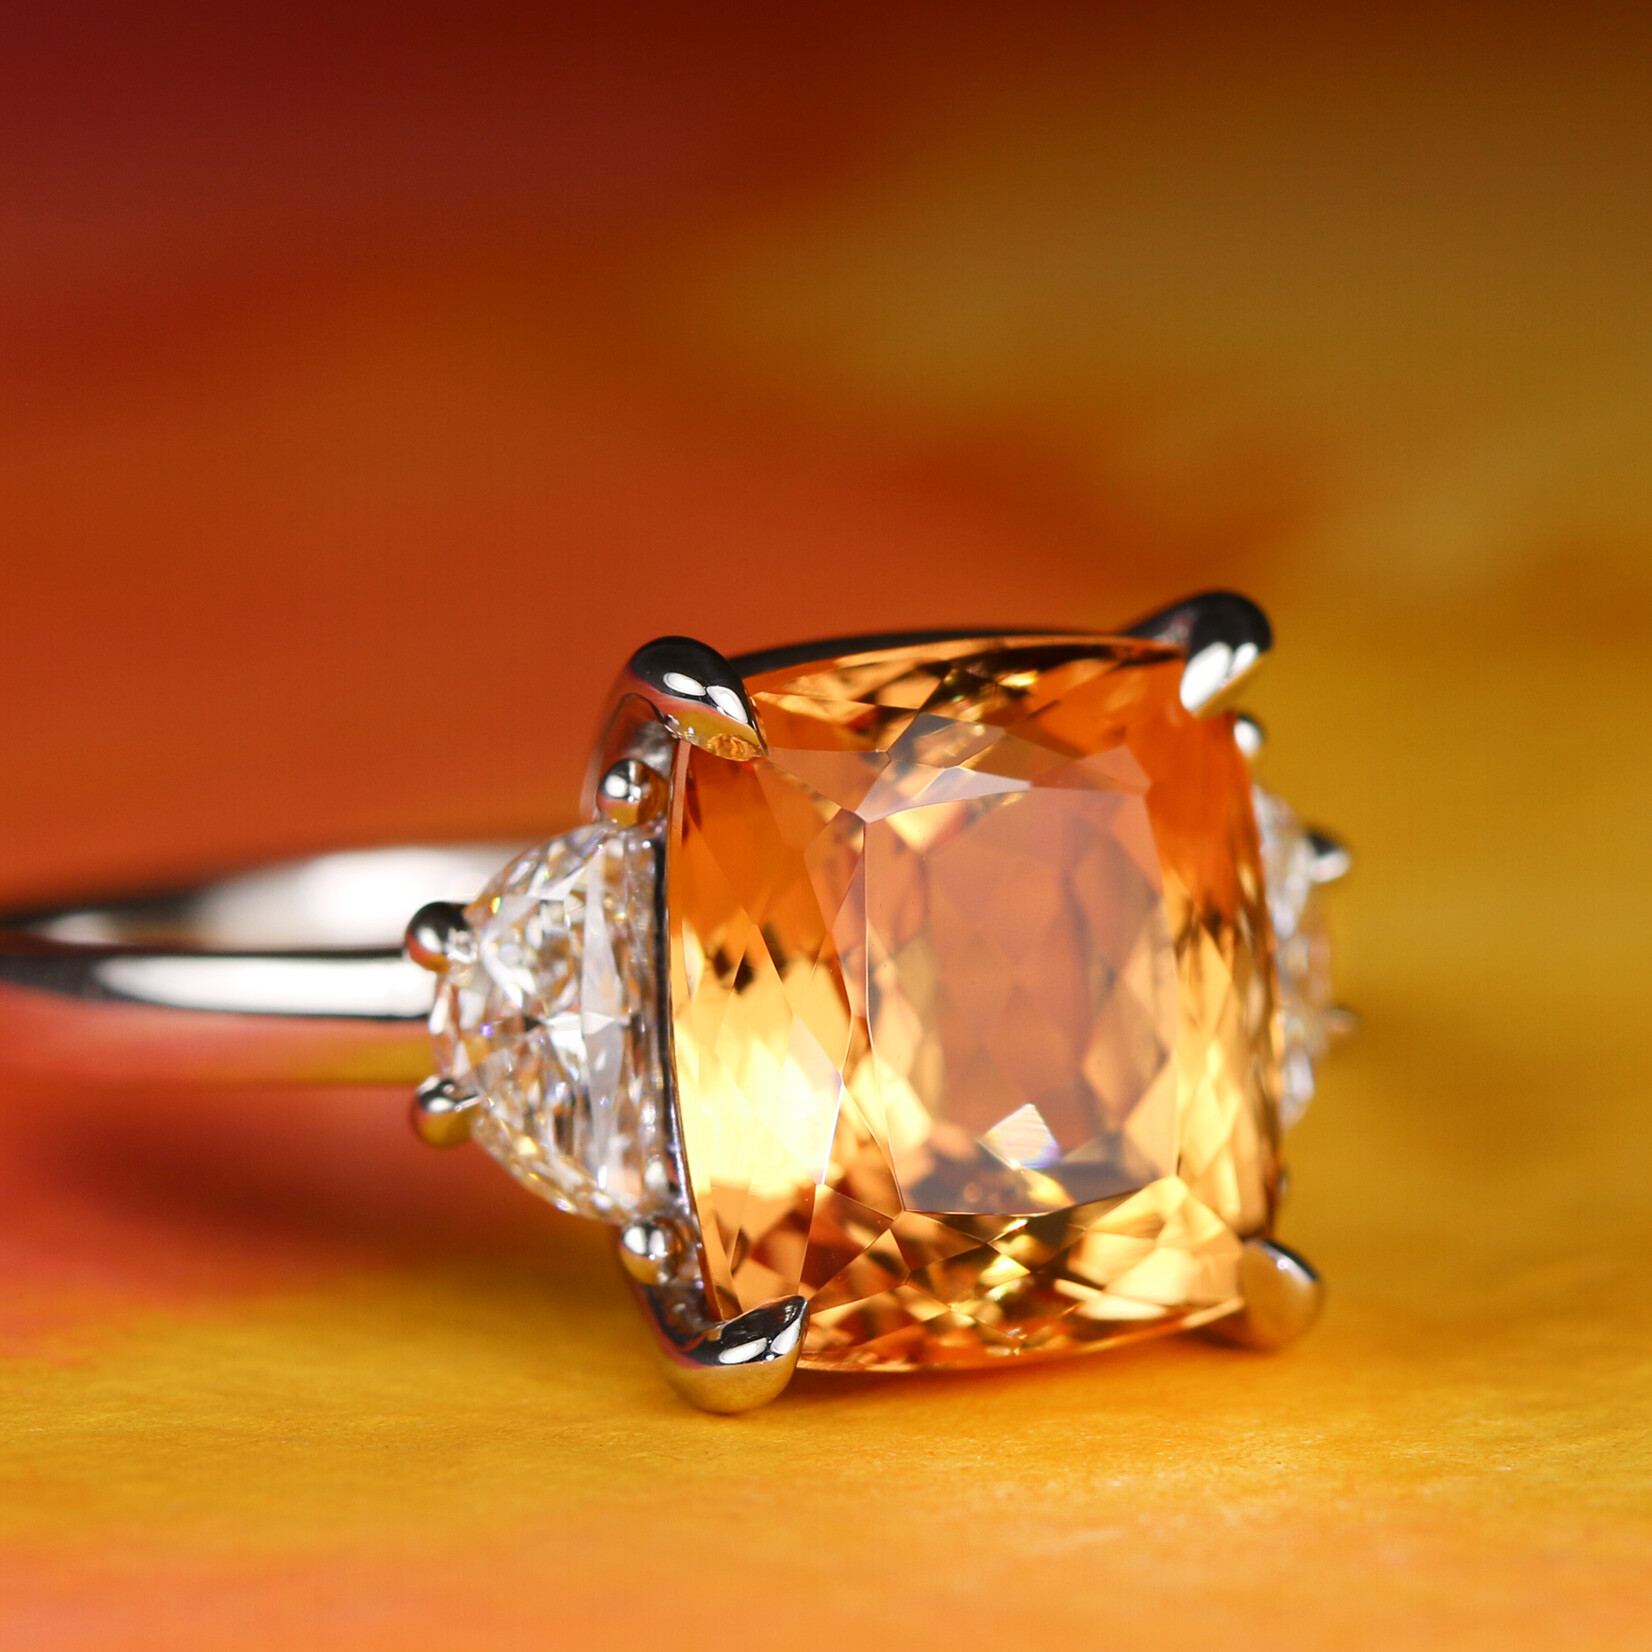 Baxter Moerman Penelope Ring with Imperial Topaz and Diamonds